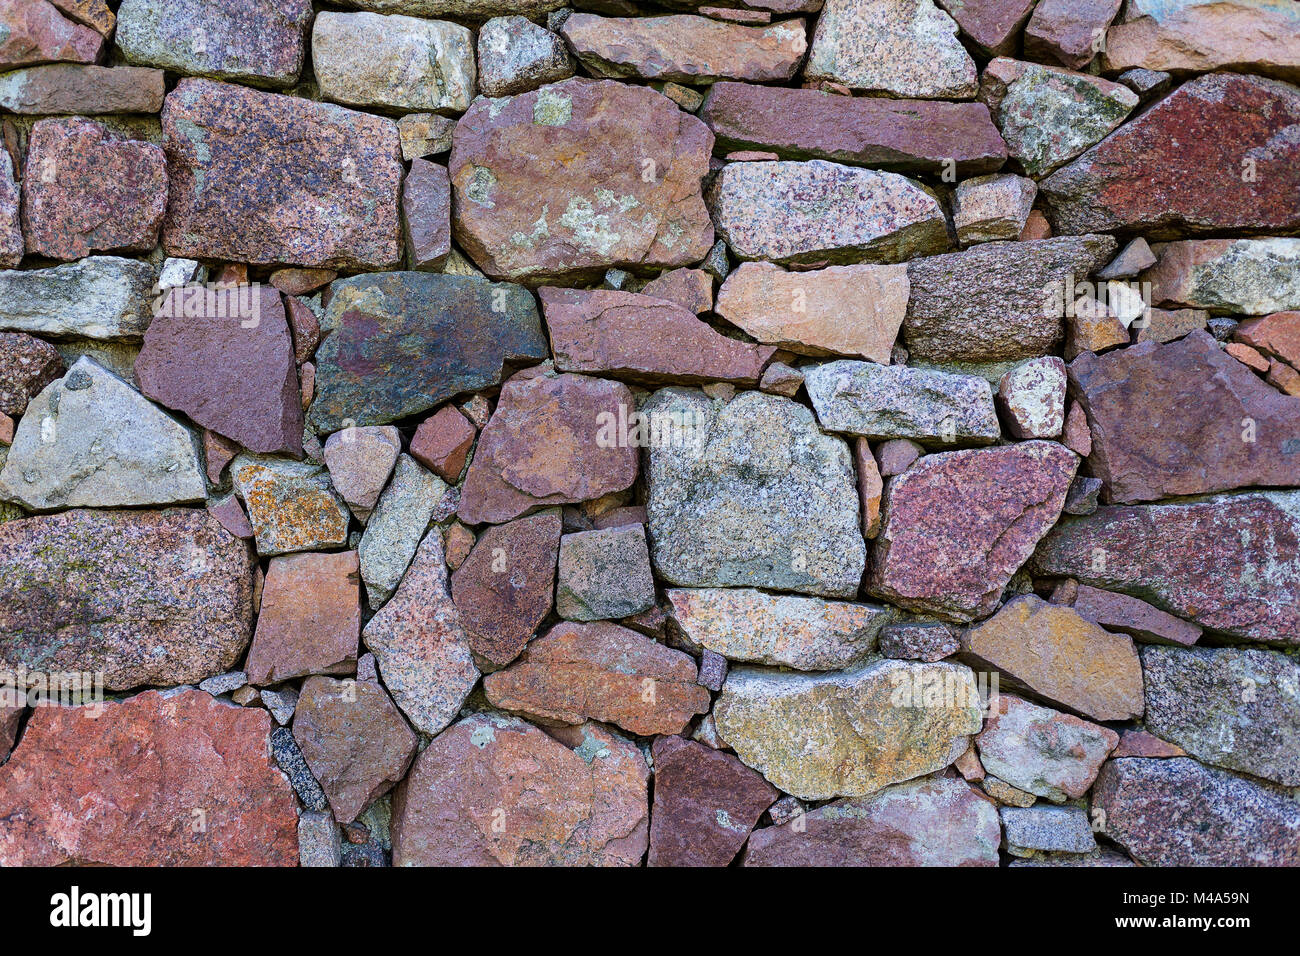 Drystone wall,stones in different colours and sizes Stock Photo